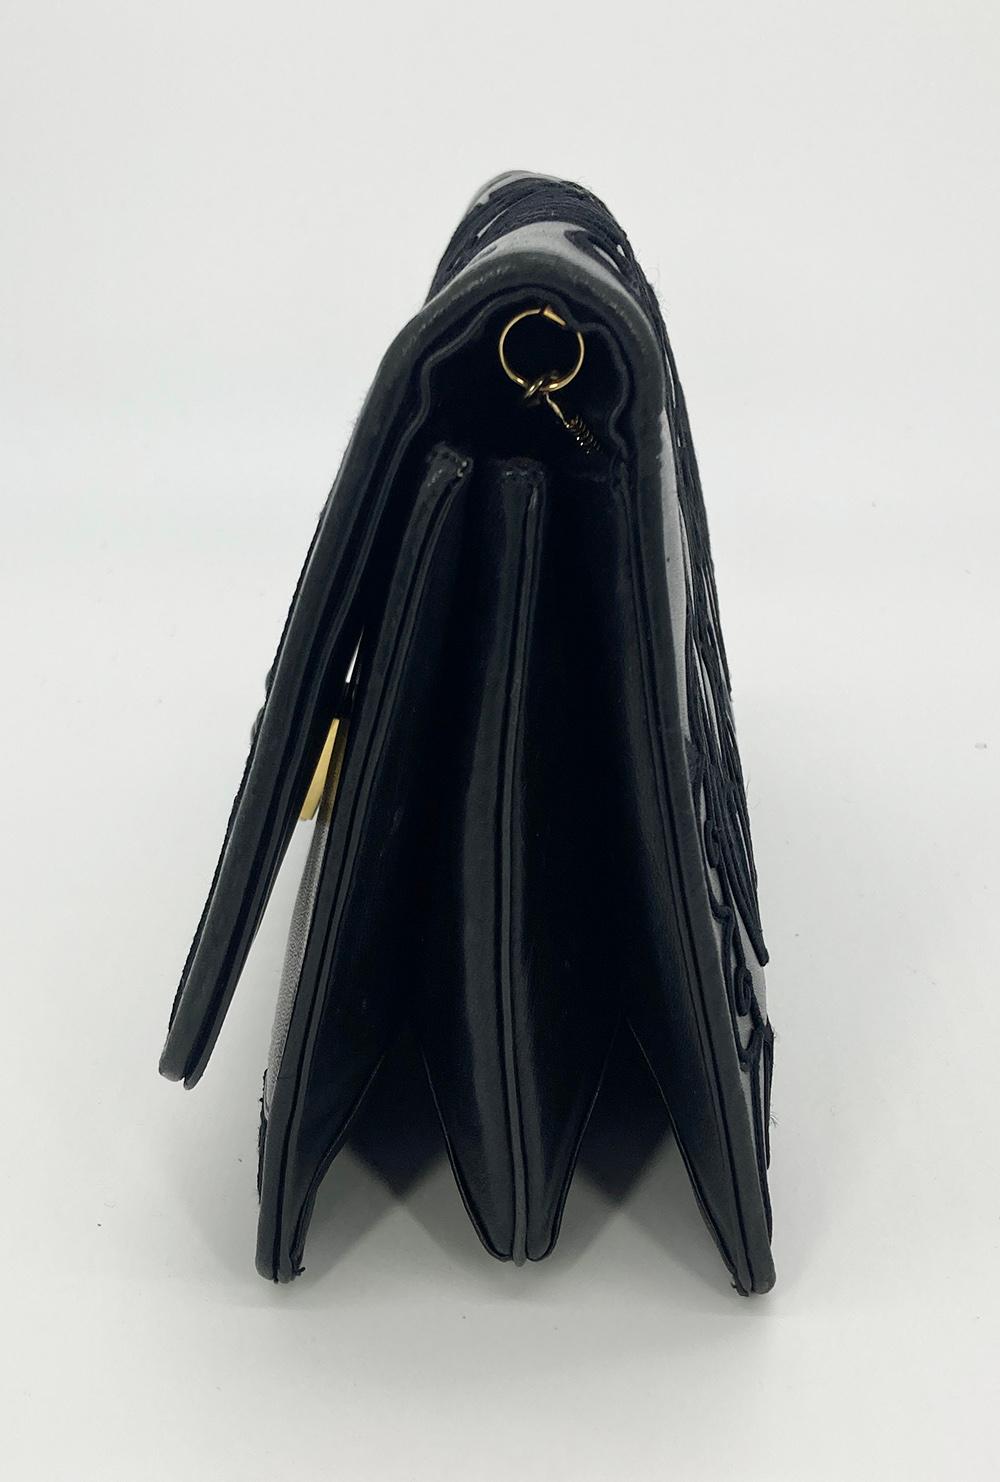 Judith Leiber Black Embroidered Leather Tassel Clutch in very good condition. Black lambskin exterior with unique embroidery, black tassel side detail and front black and gold hardware. Front latch flap closure opens to a black nylon interior with 3